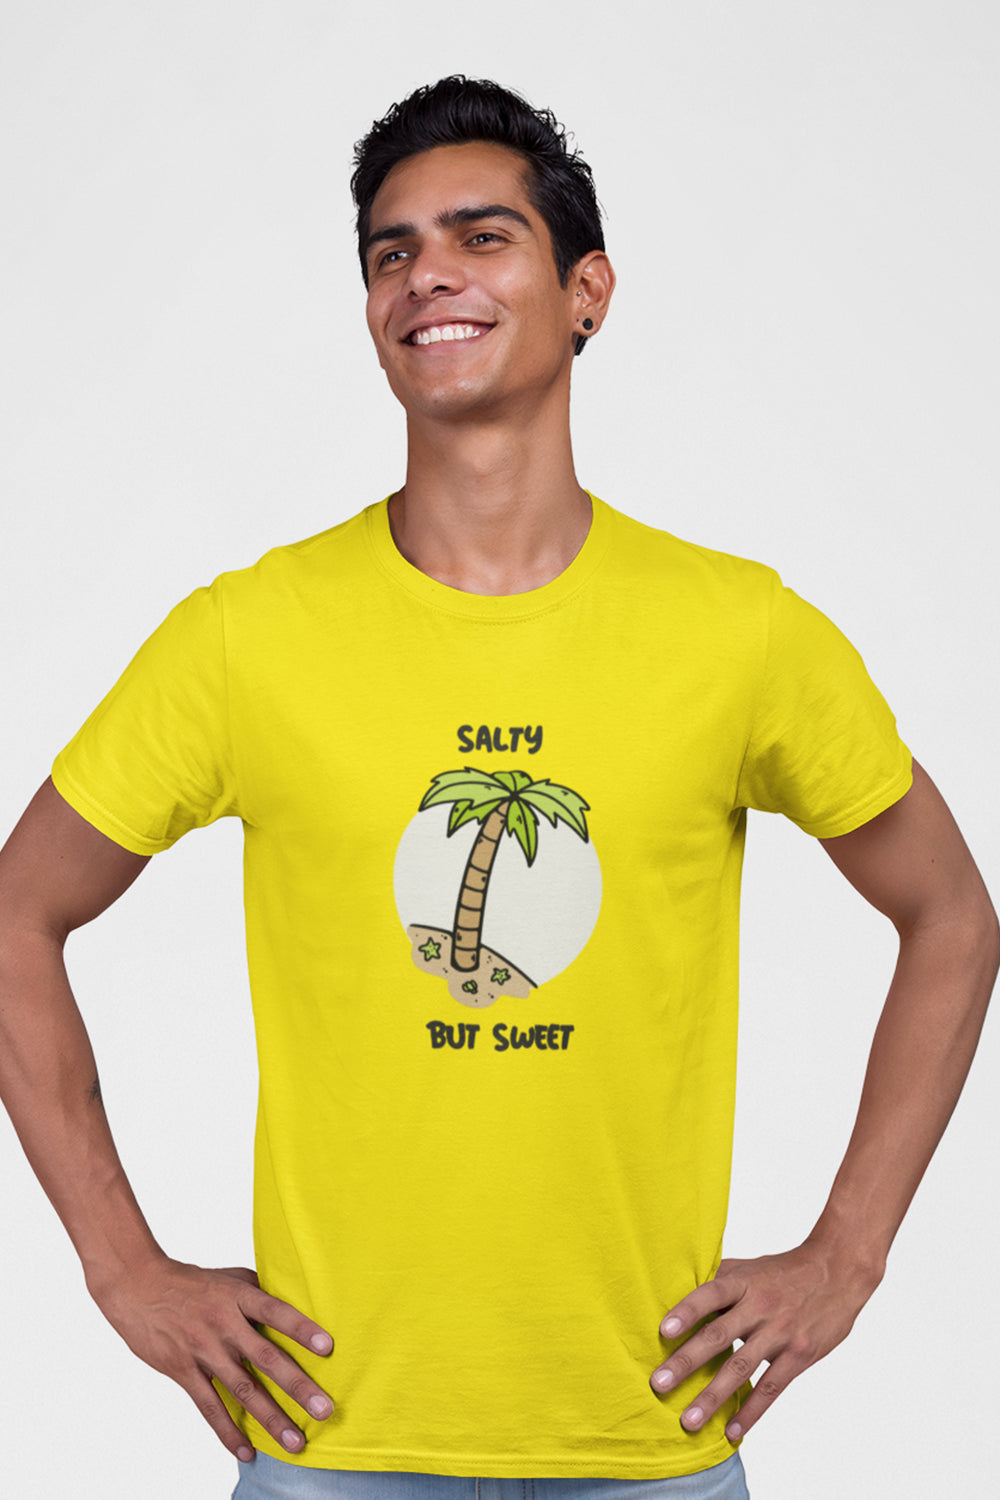 Salty But Sweet Graphic Printed Yellow Tshirt